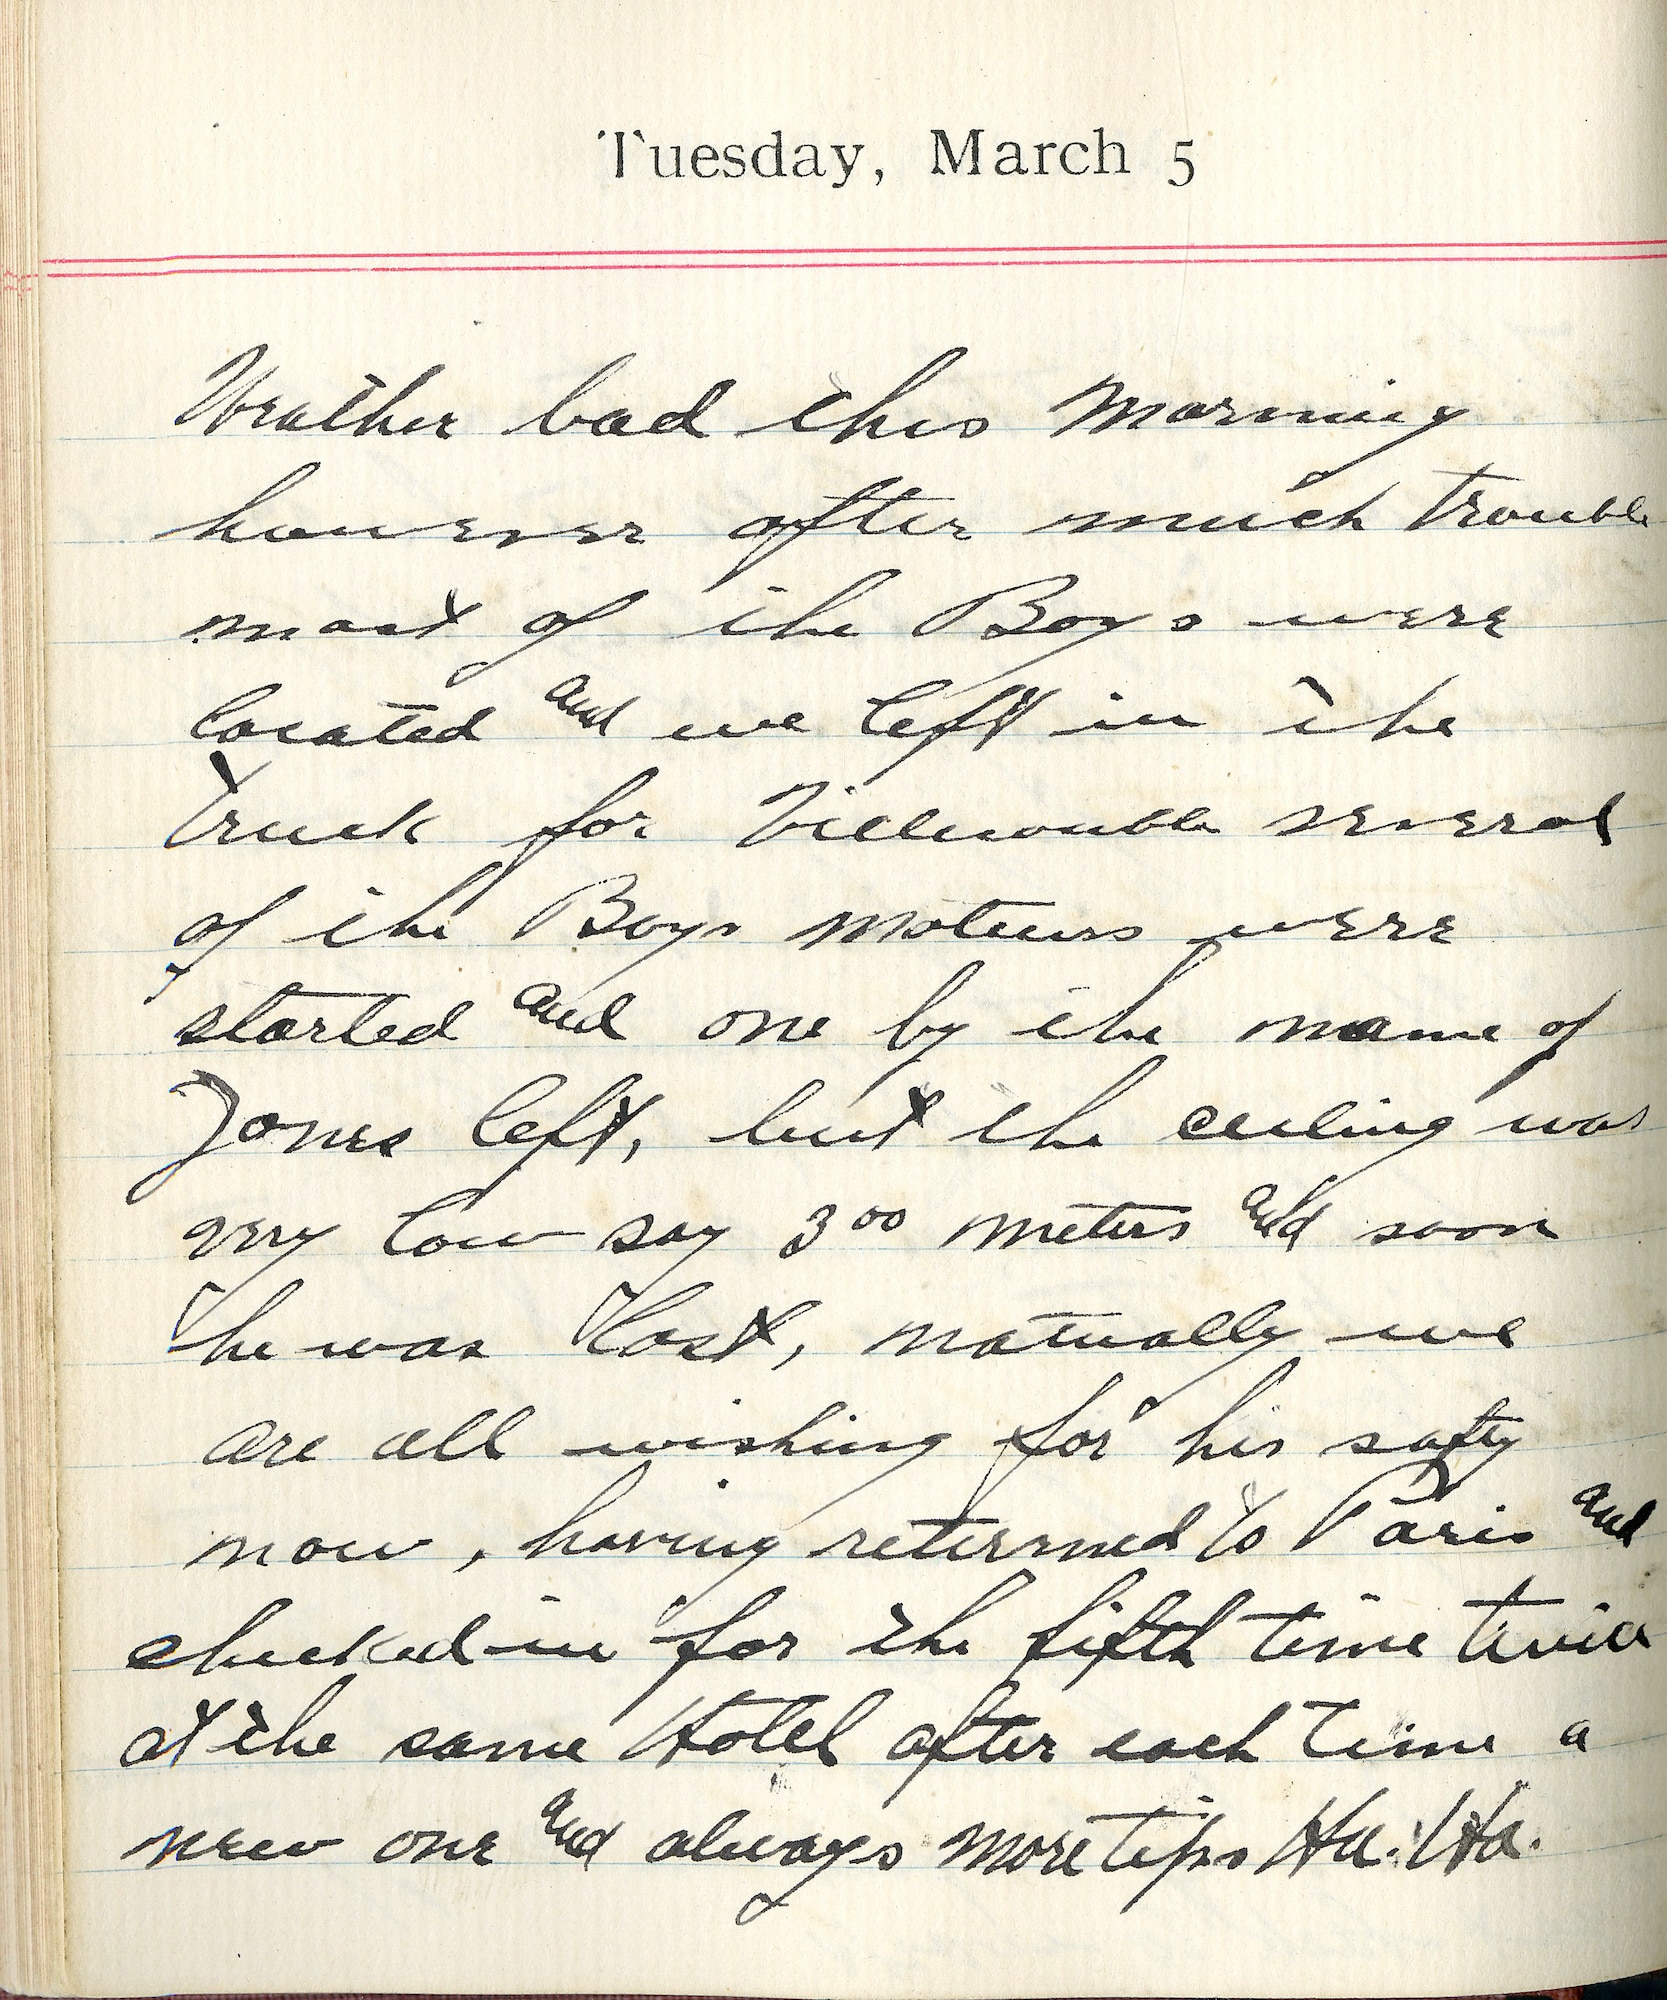 Capt. Edward V. Rickenbacker's 1918 wartime diary entry. (03/05/1918).

Weather bad this morning.  However after much trouble, most of the boys were located and we left in the truck for Villacoublay. Several of the boys’ motors were started and one by the name of James left, but the ceiling was very low, say 300 meters, and soon he was lost.  Naturally we are all wishing for his safety.  Now, having returned to Paris and checked in for the fifth time, twice at the same hotel after each time a new one and always more tips.  Ha.  Ha.